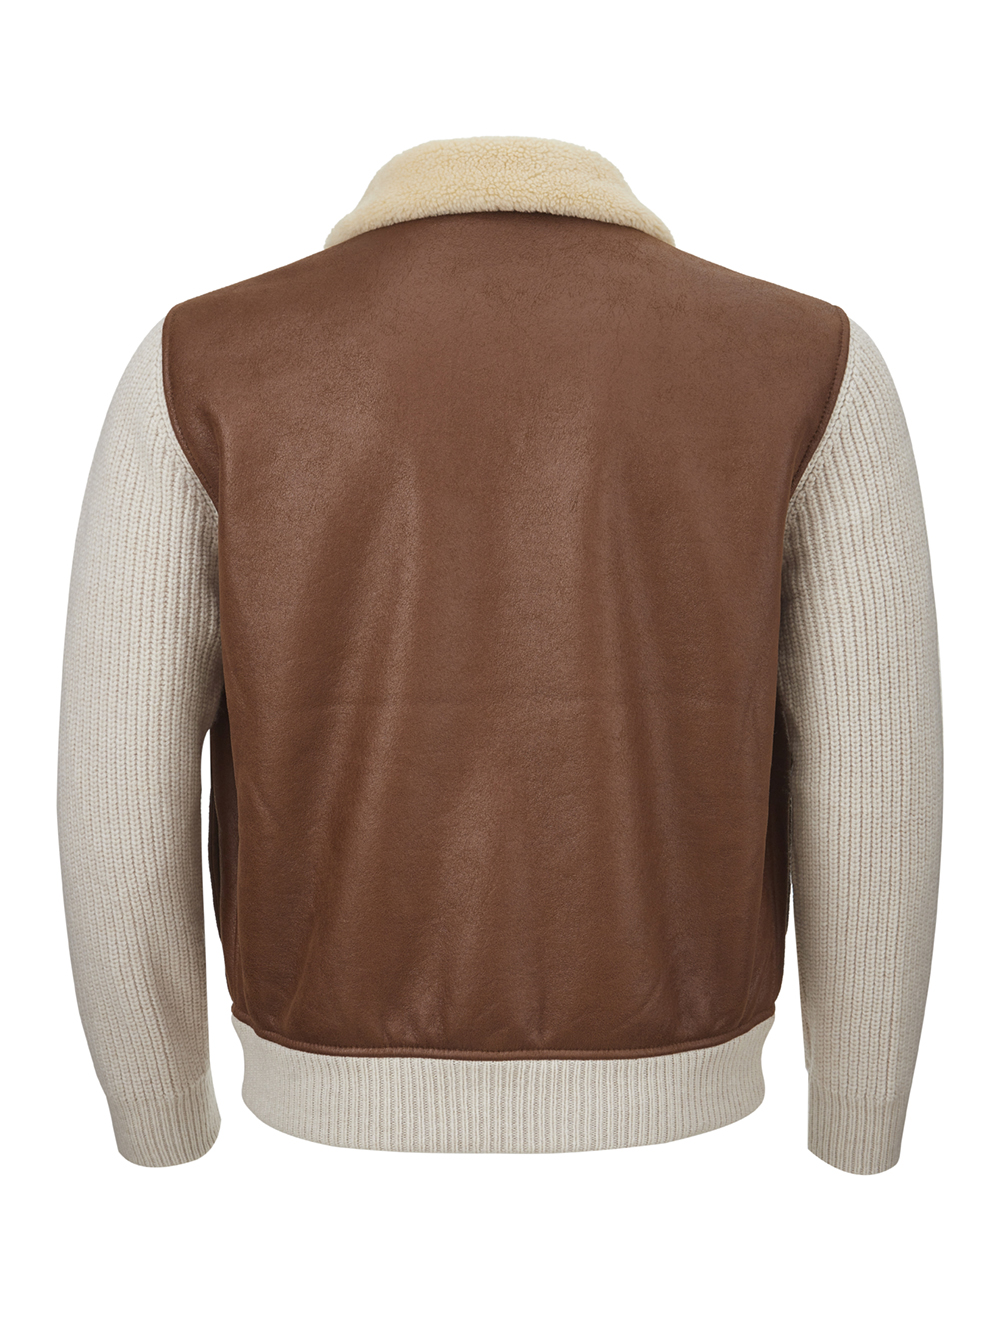 Wool and Eco-Leather Brown Jacket